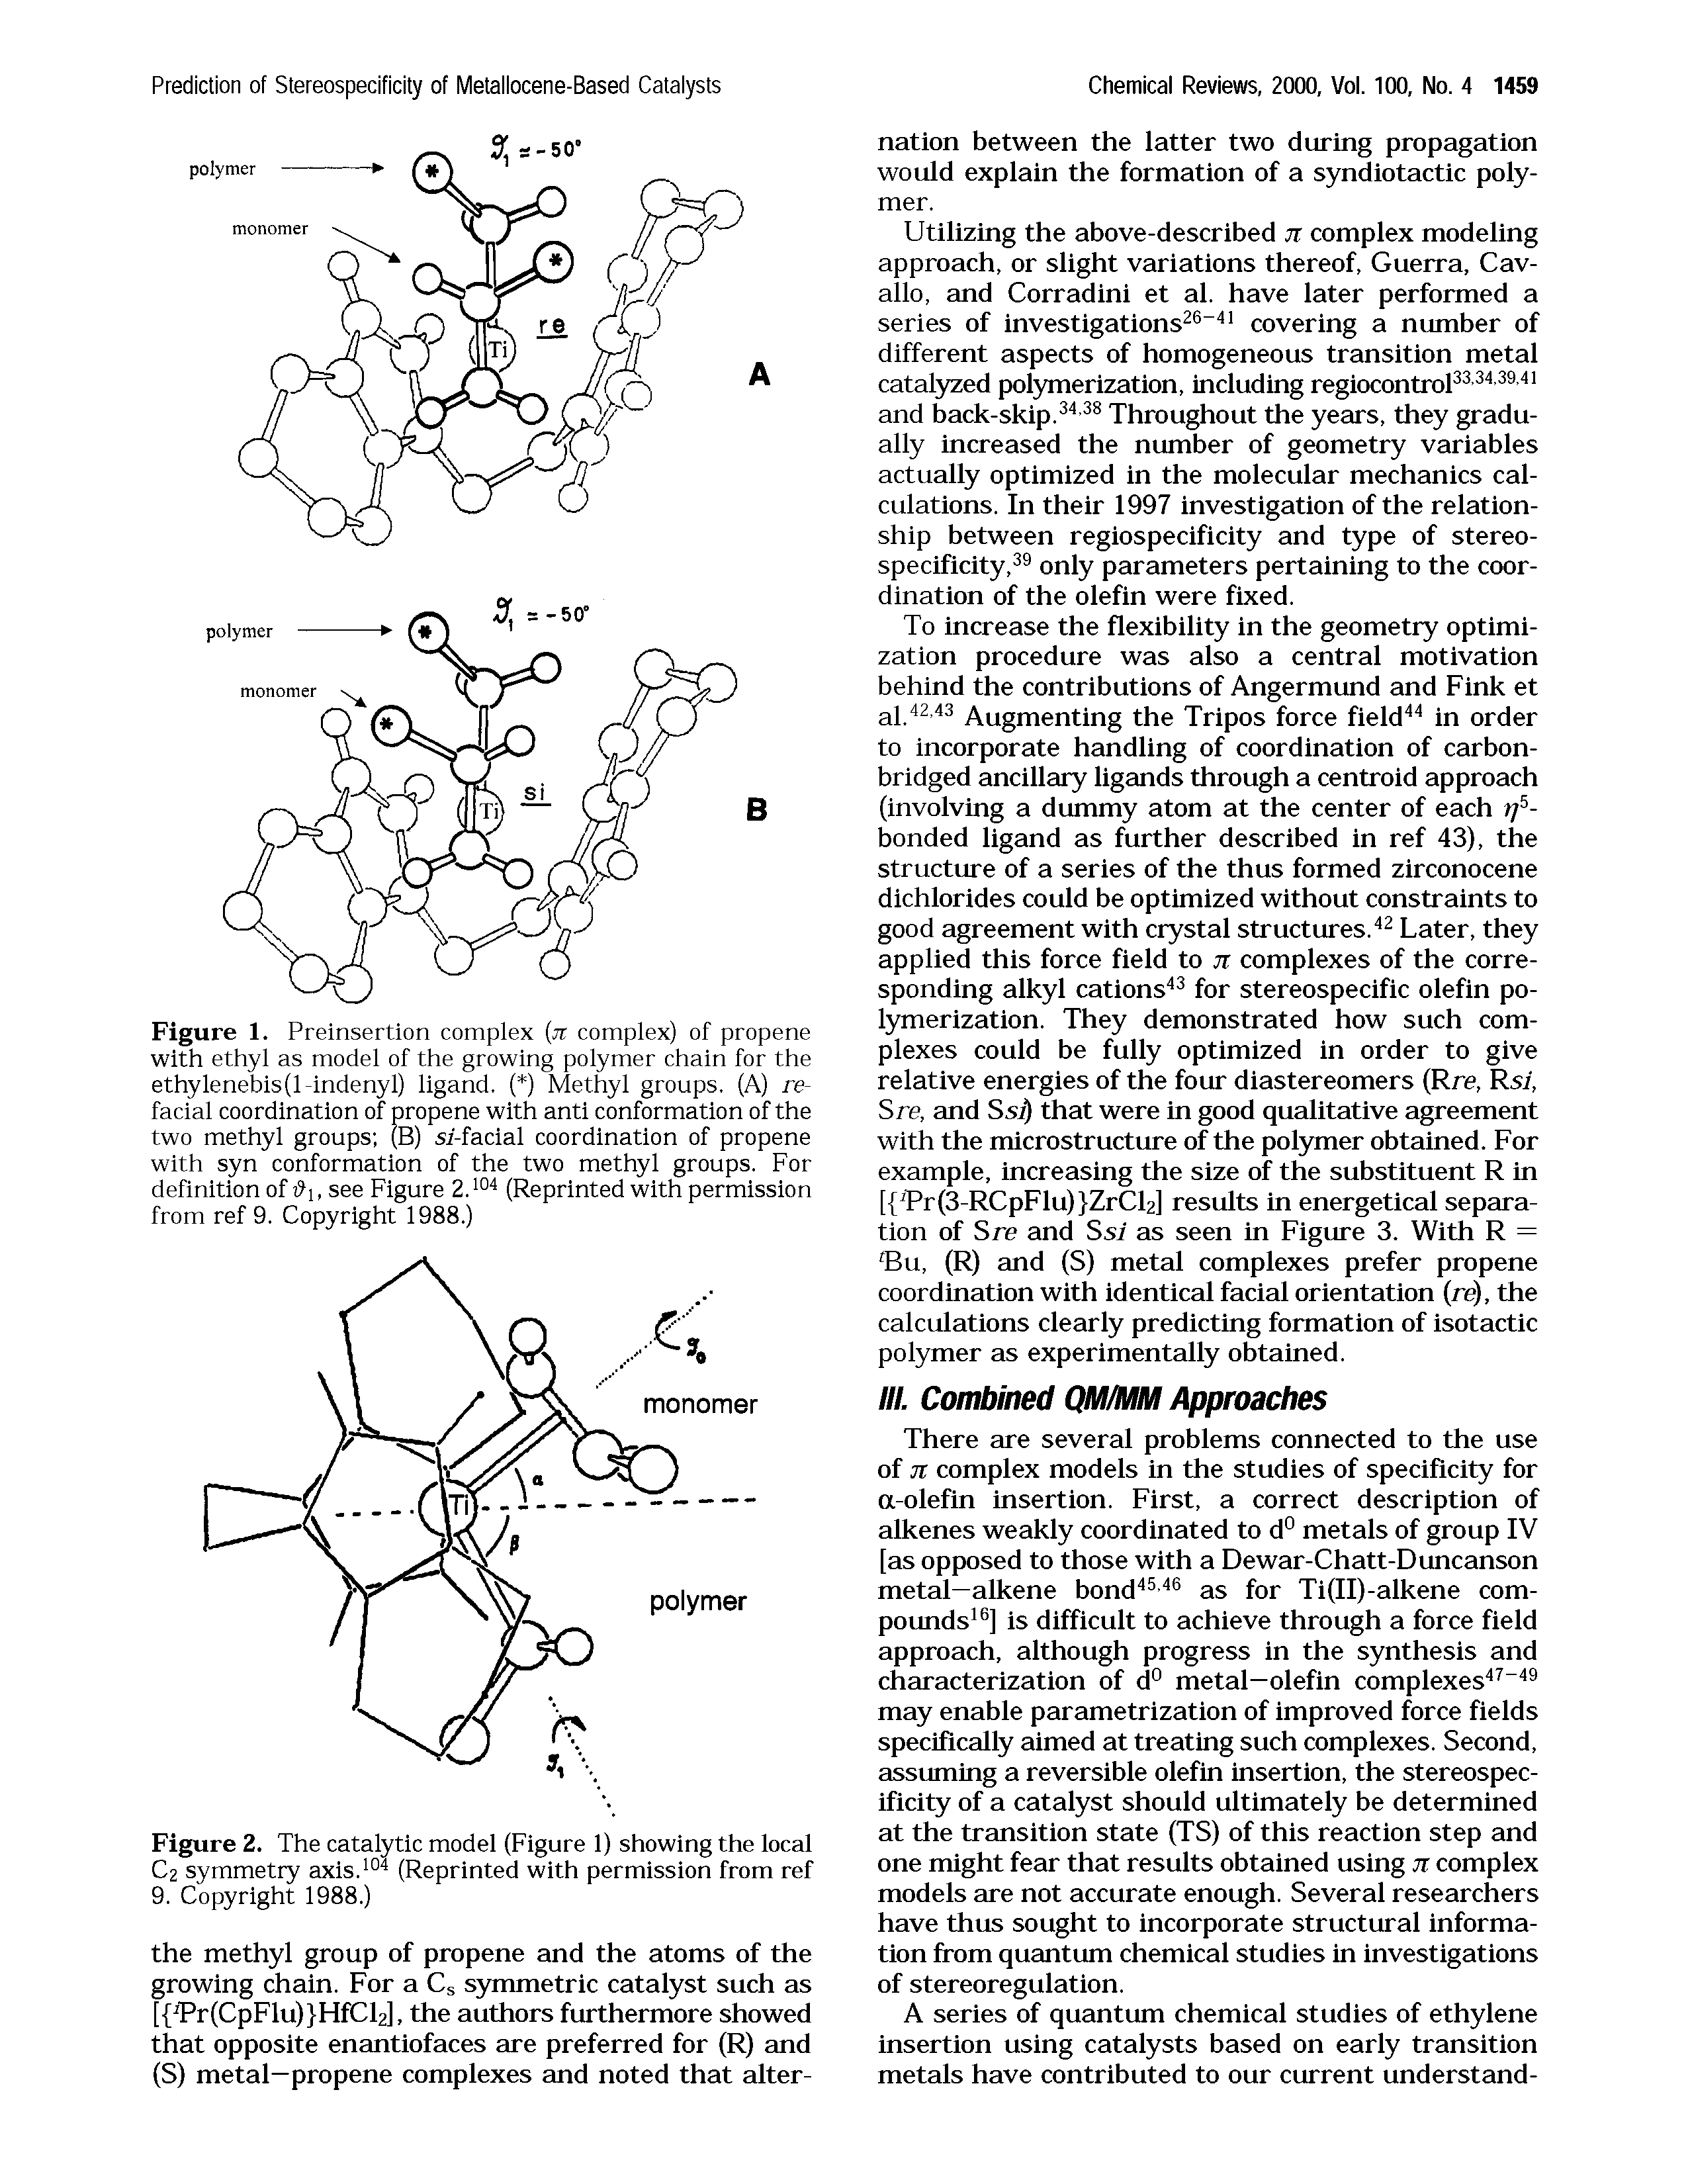 Figure 1. Preinsertion complex (n complex) of propene with ethyl as model of the growing polymer chain for the ethylenebis(l-indenyl) ligand. ( ) Methyl groups. (A) refacial coordination of propene with anti conformation of the two methyl groups (B) si-faclal coordination of propene with syn conformation of the two methyl groups. For definition of r>i, see Figure 2. ° (Reprinted with permission from ref 9. Copyright 1988.)...